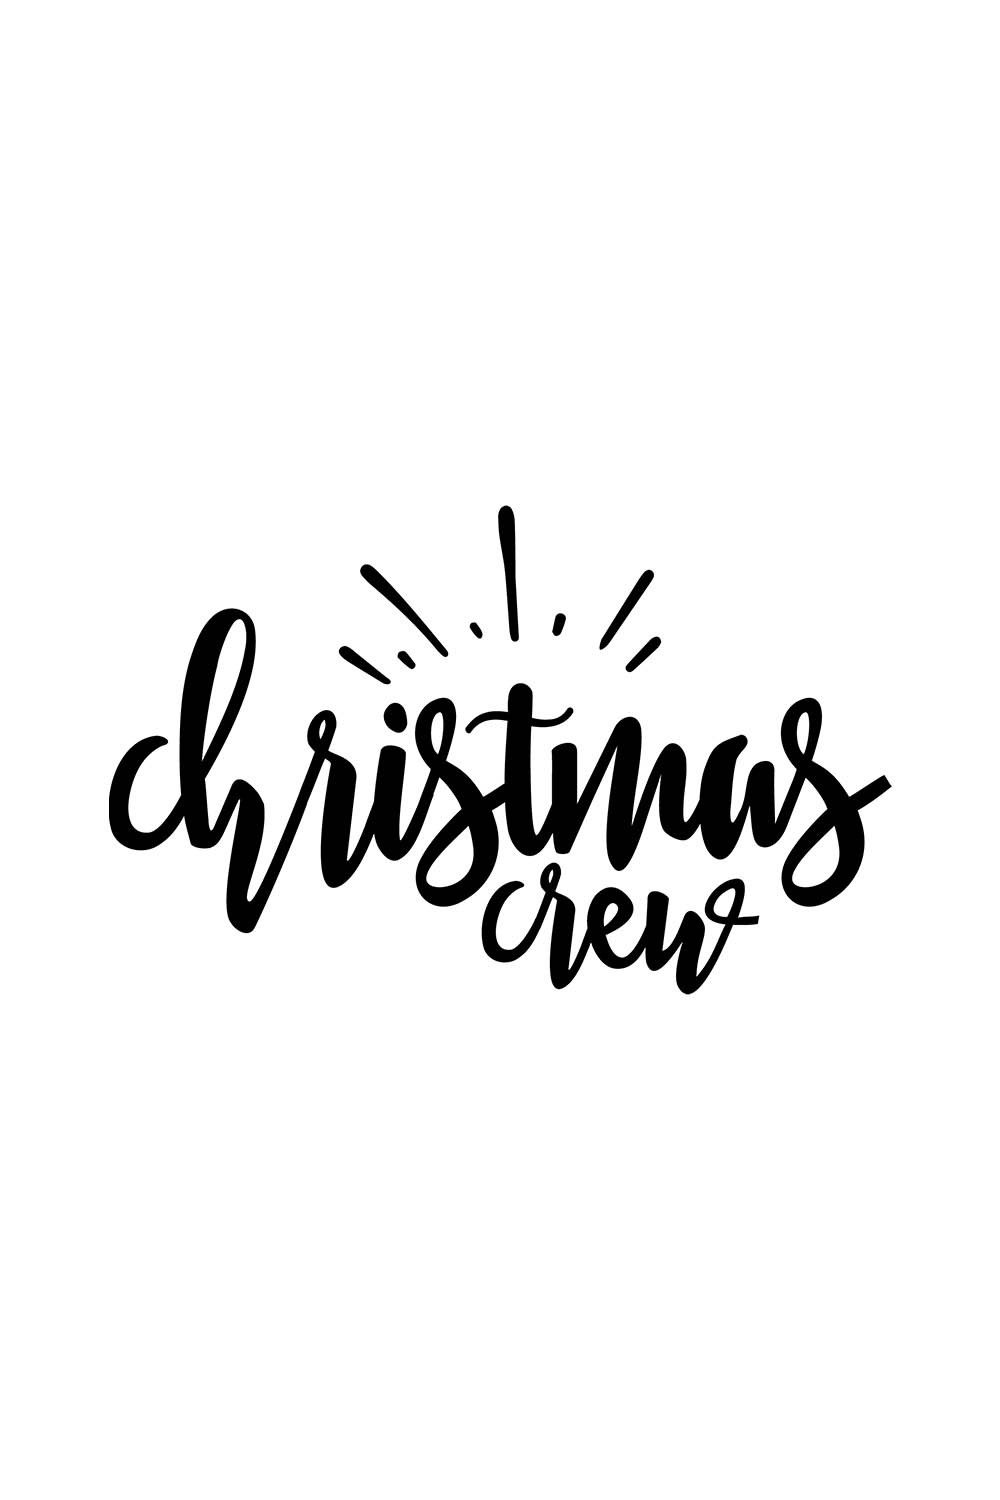 Image with a charming black inscription for the print "Christmas Crew".